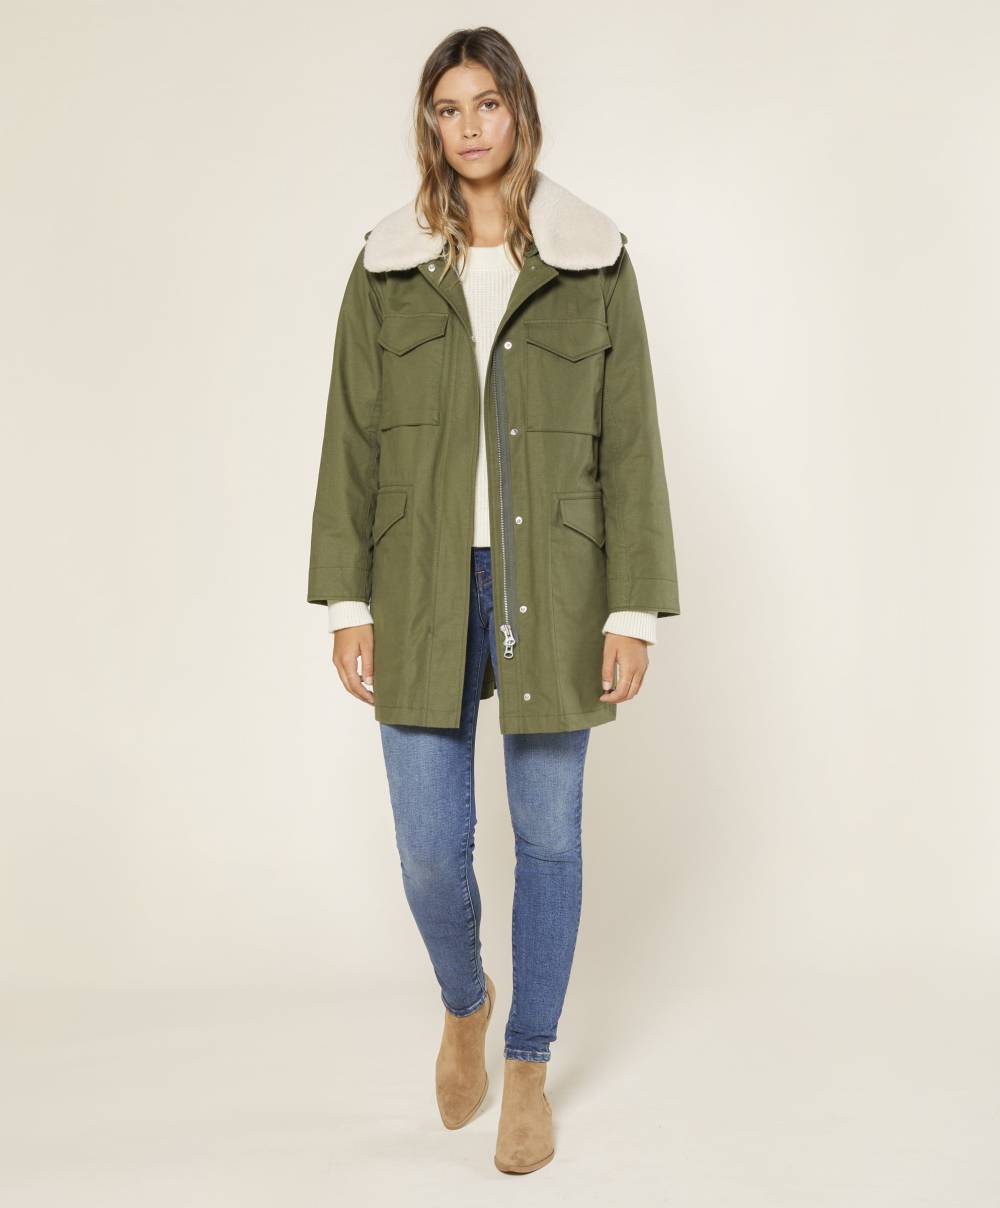 outerknown cheap ethical winter coat